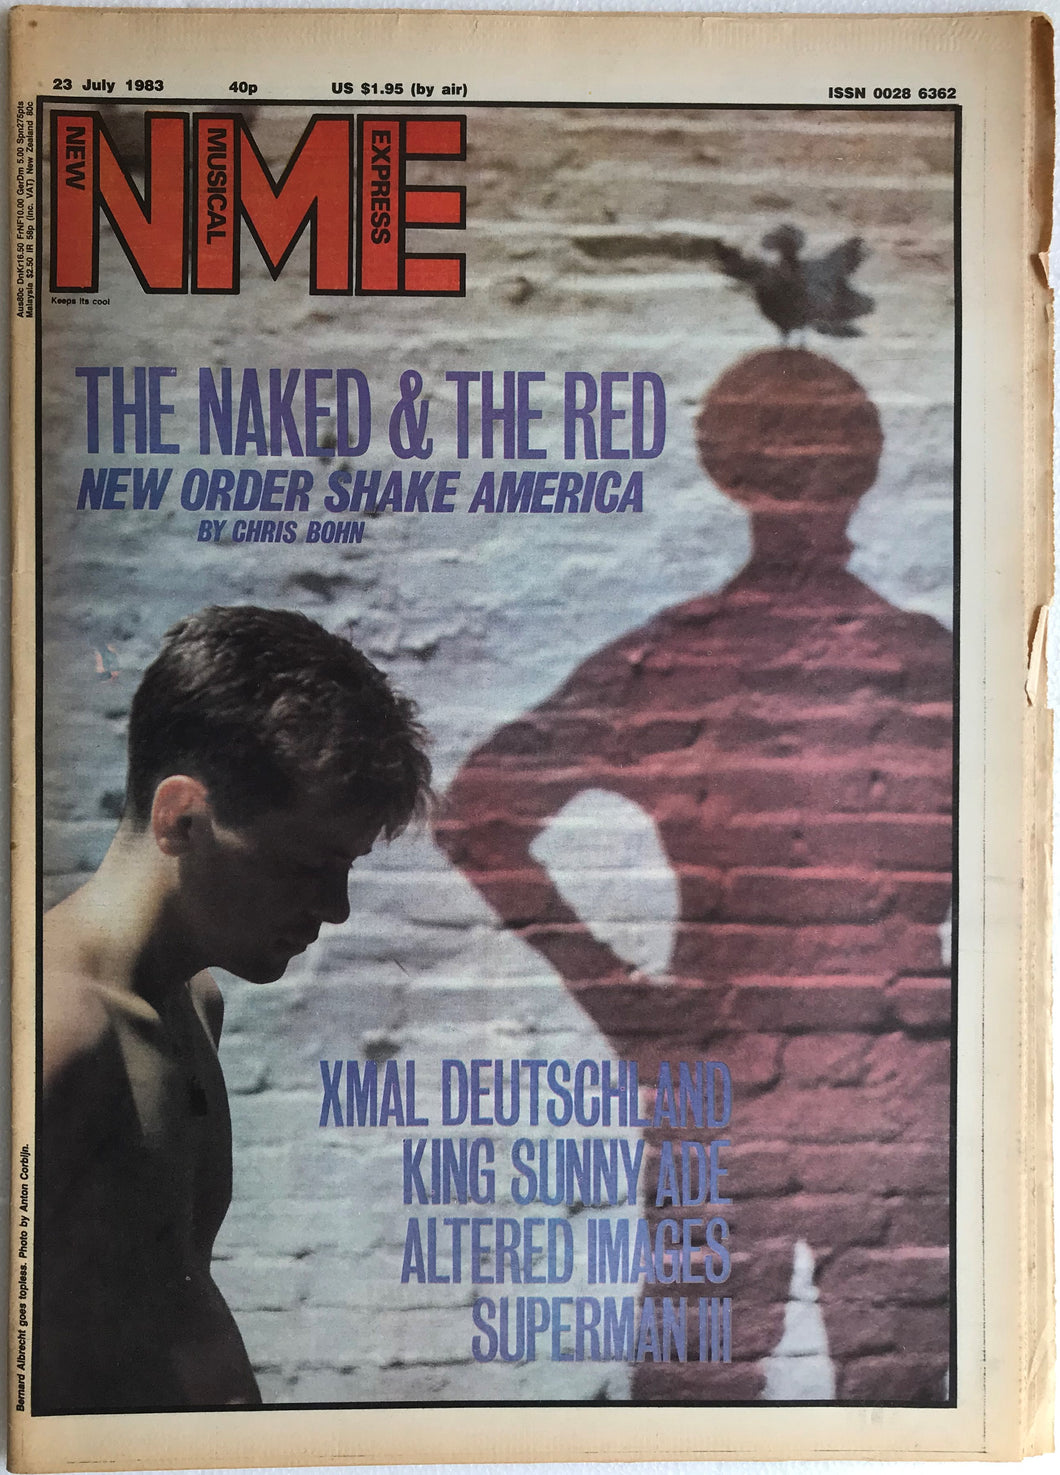 New Order - NME